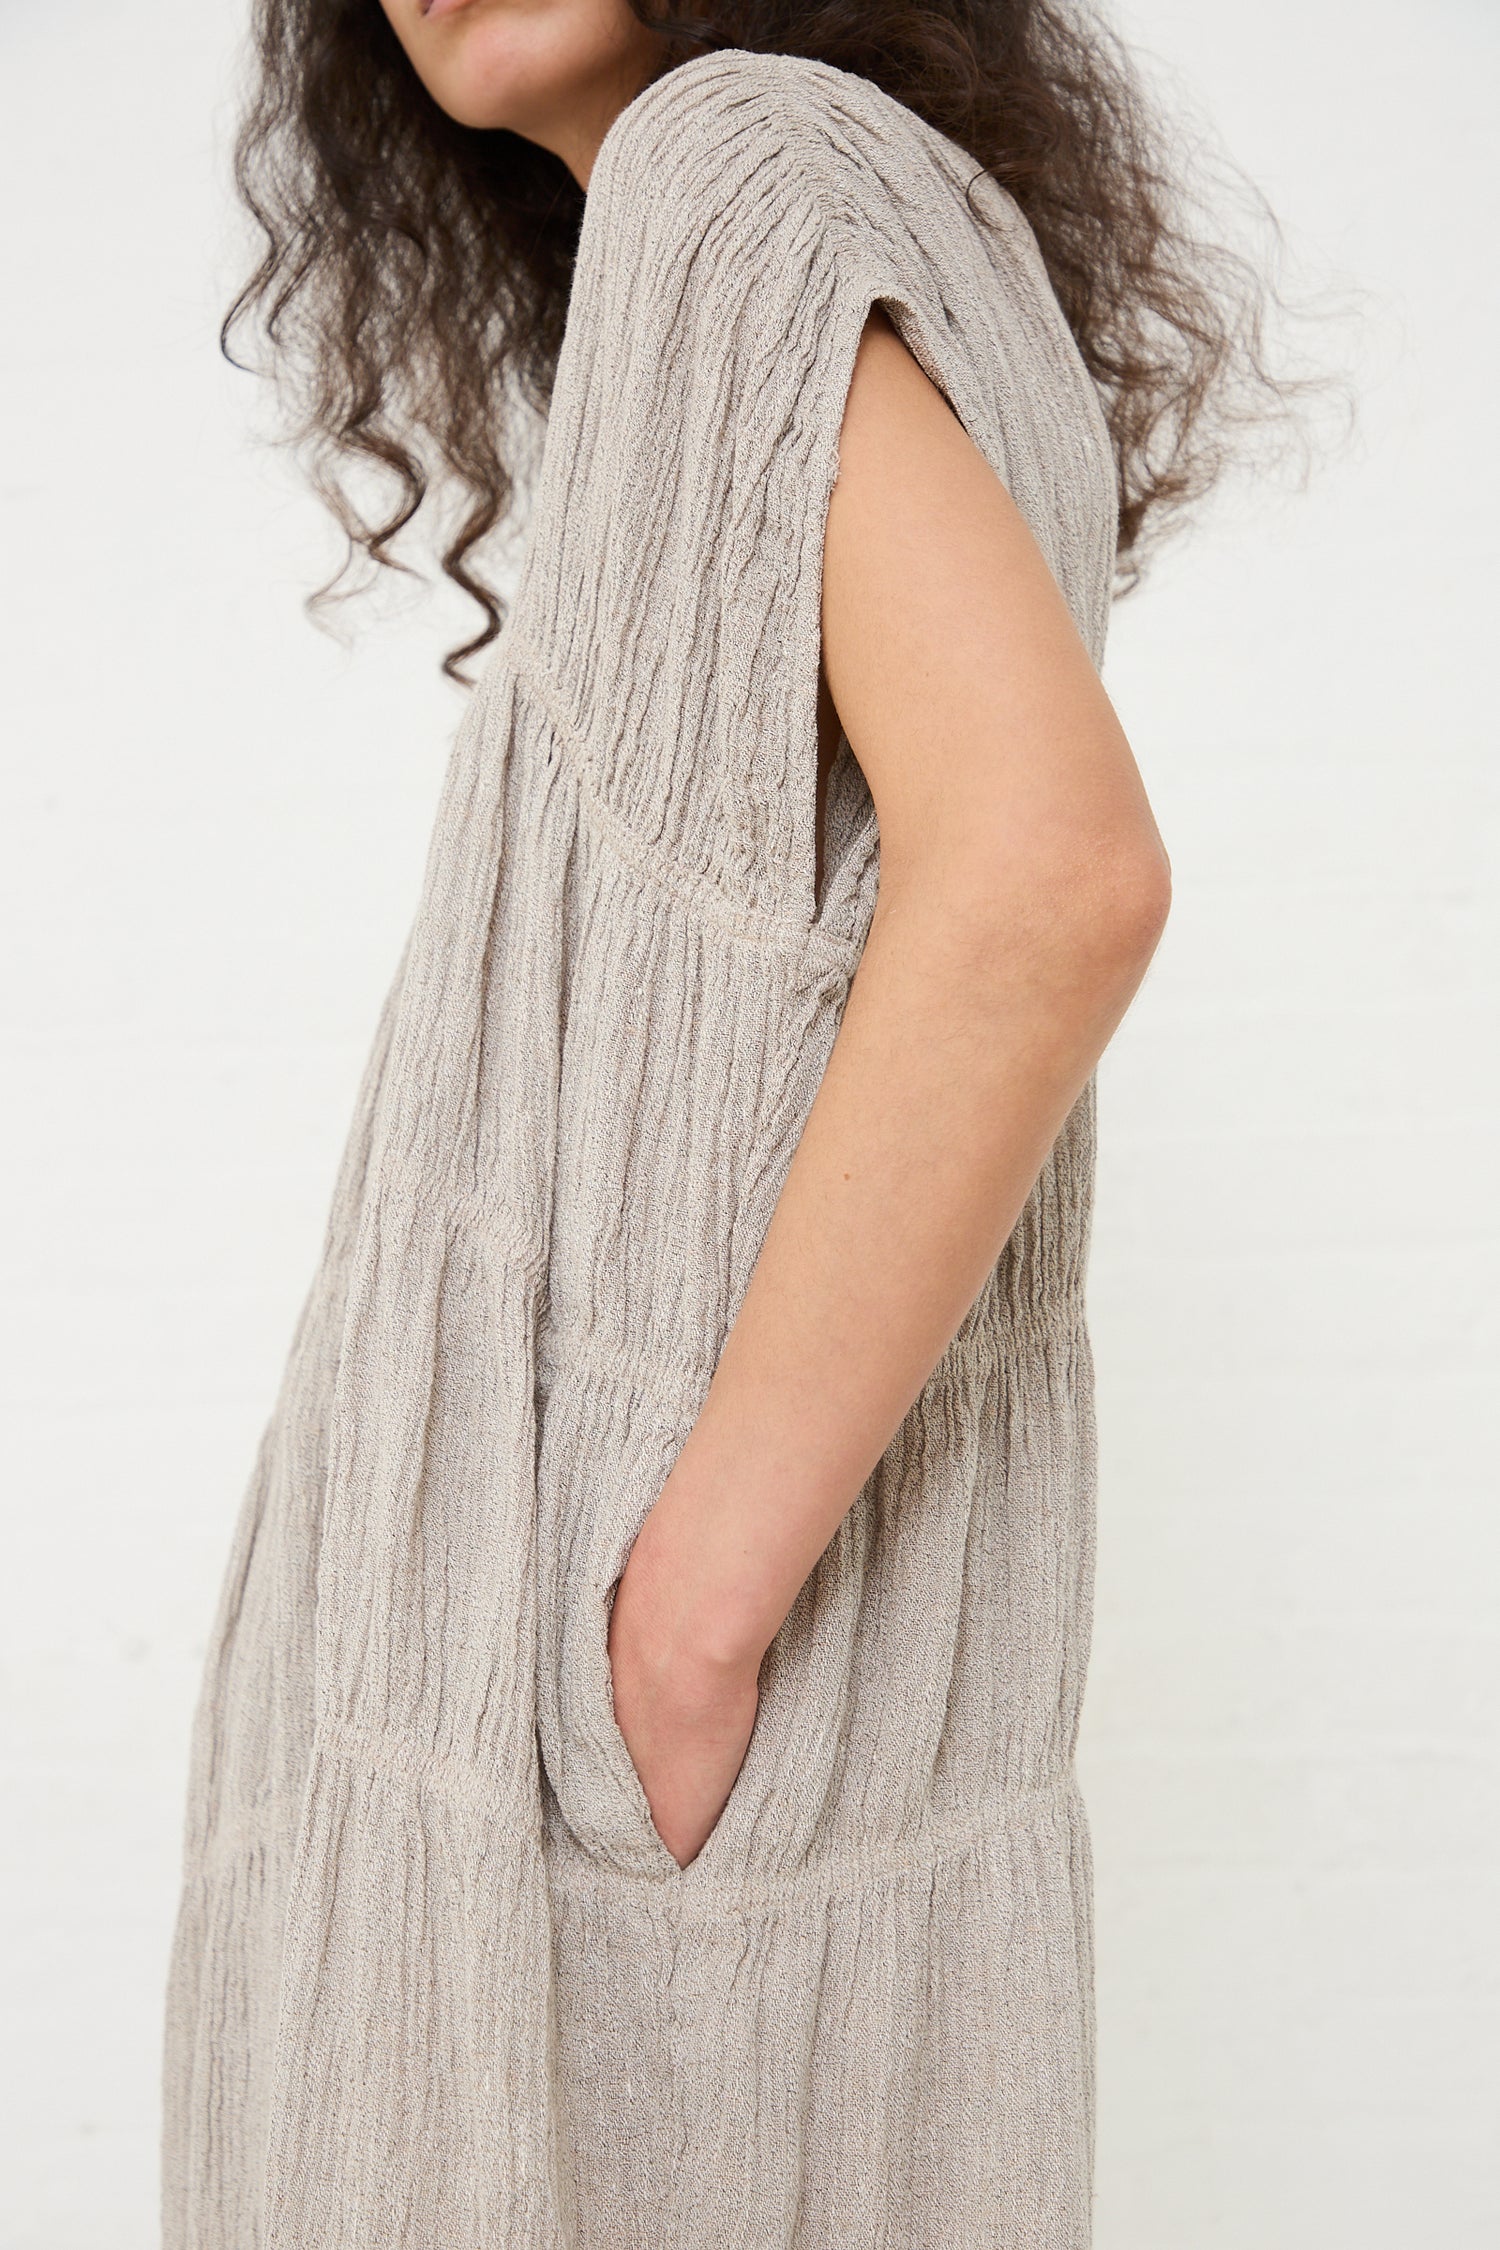 A person in a Linen Accordion Jumpsuit in Ash from Black Crane with their hand in the pocket, standing against a white wall.